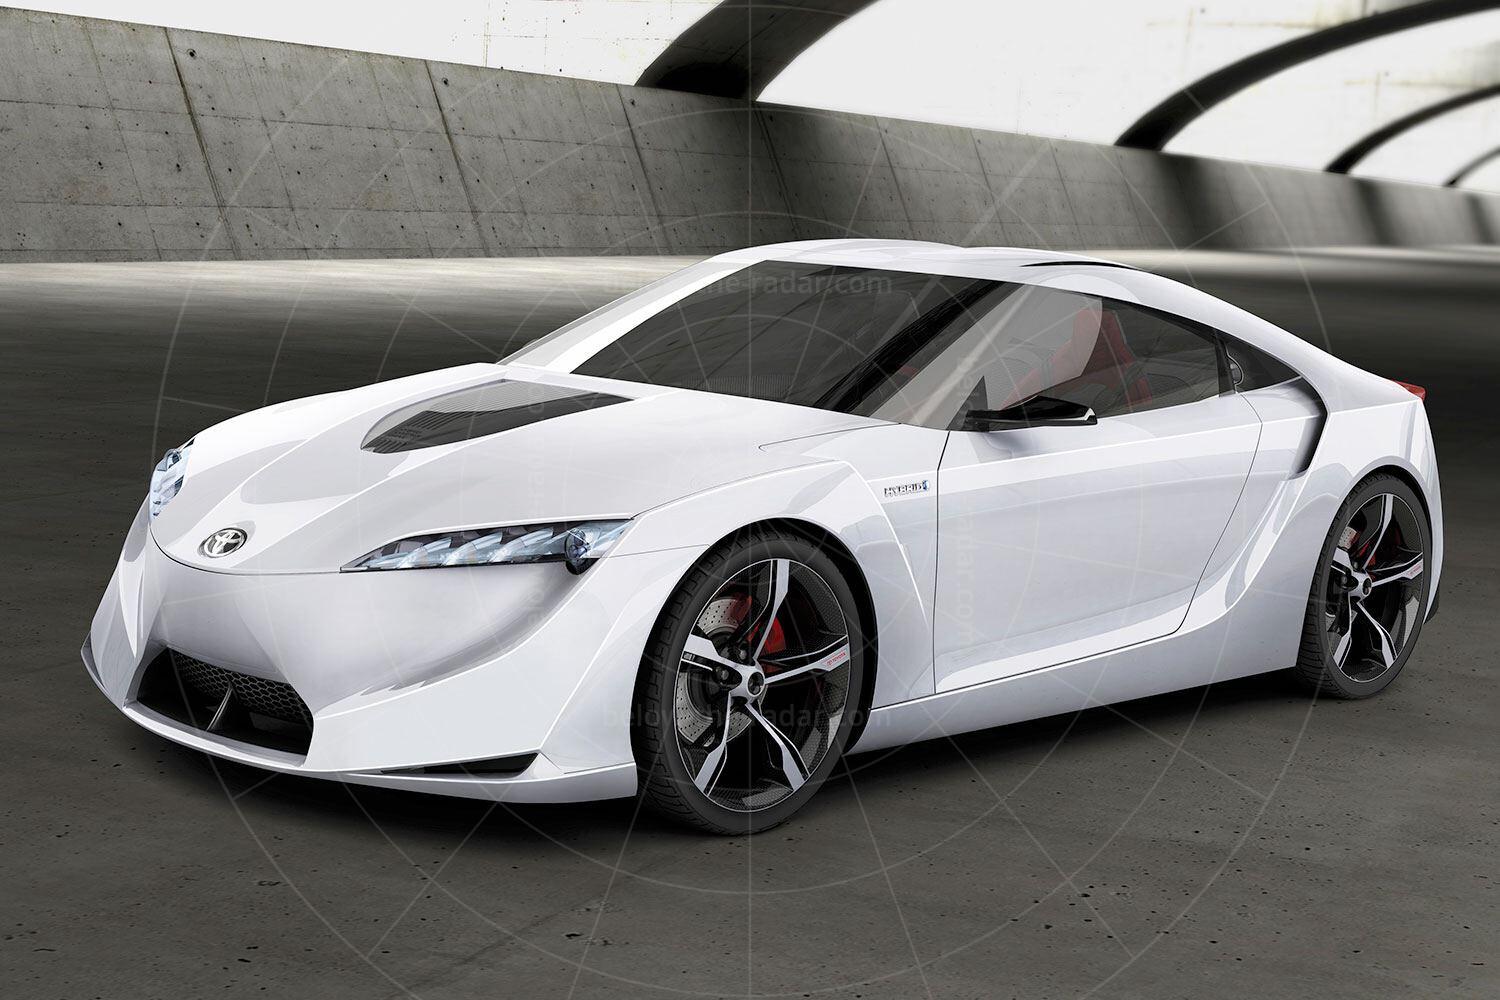 Toyota FT-HS concept Pic: Toyota | Toyota FT-HS concept